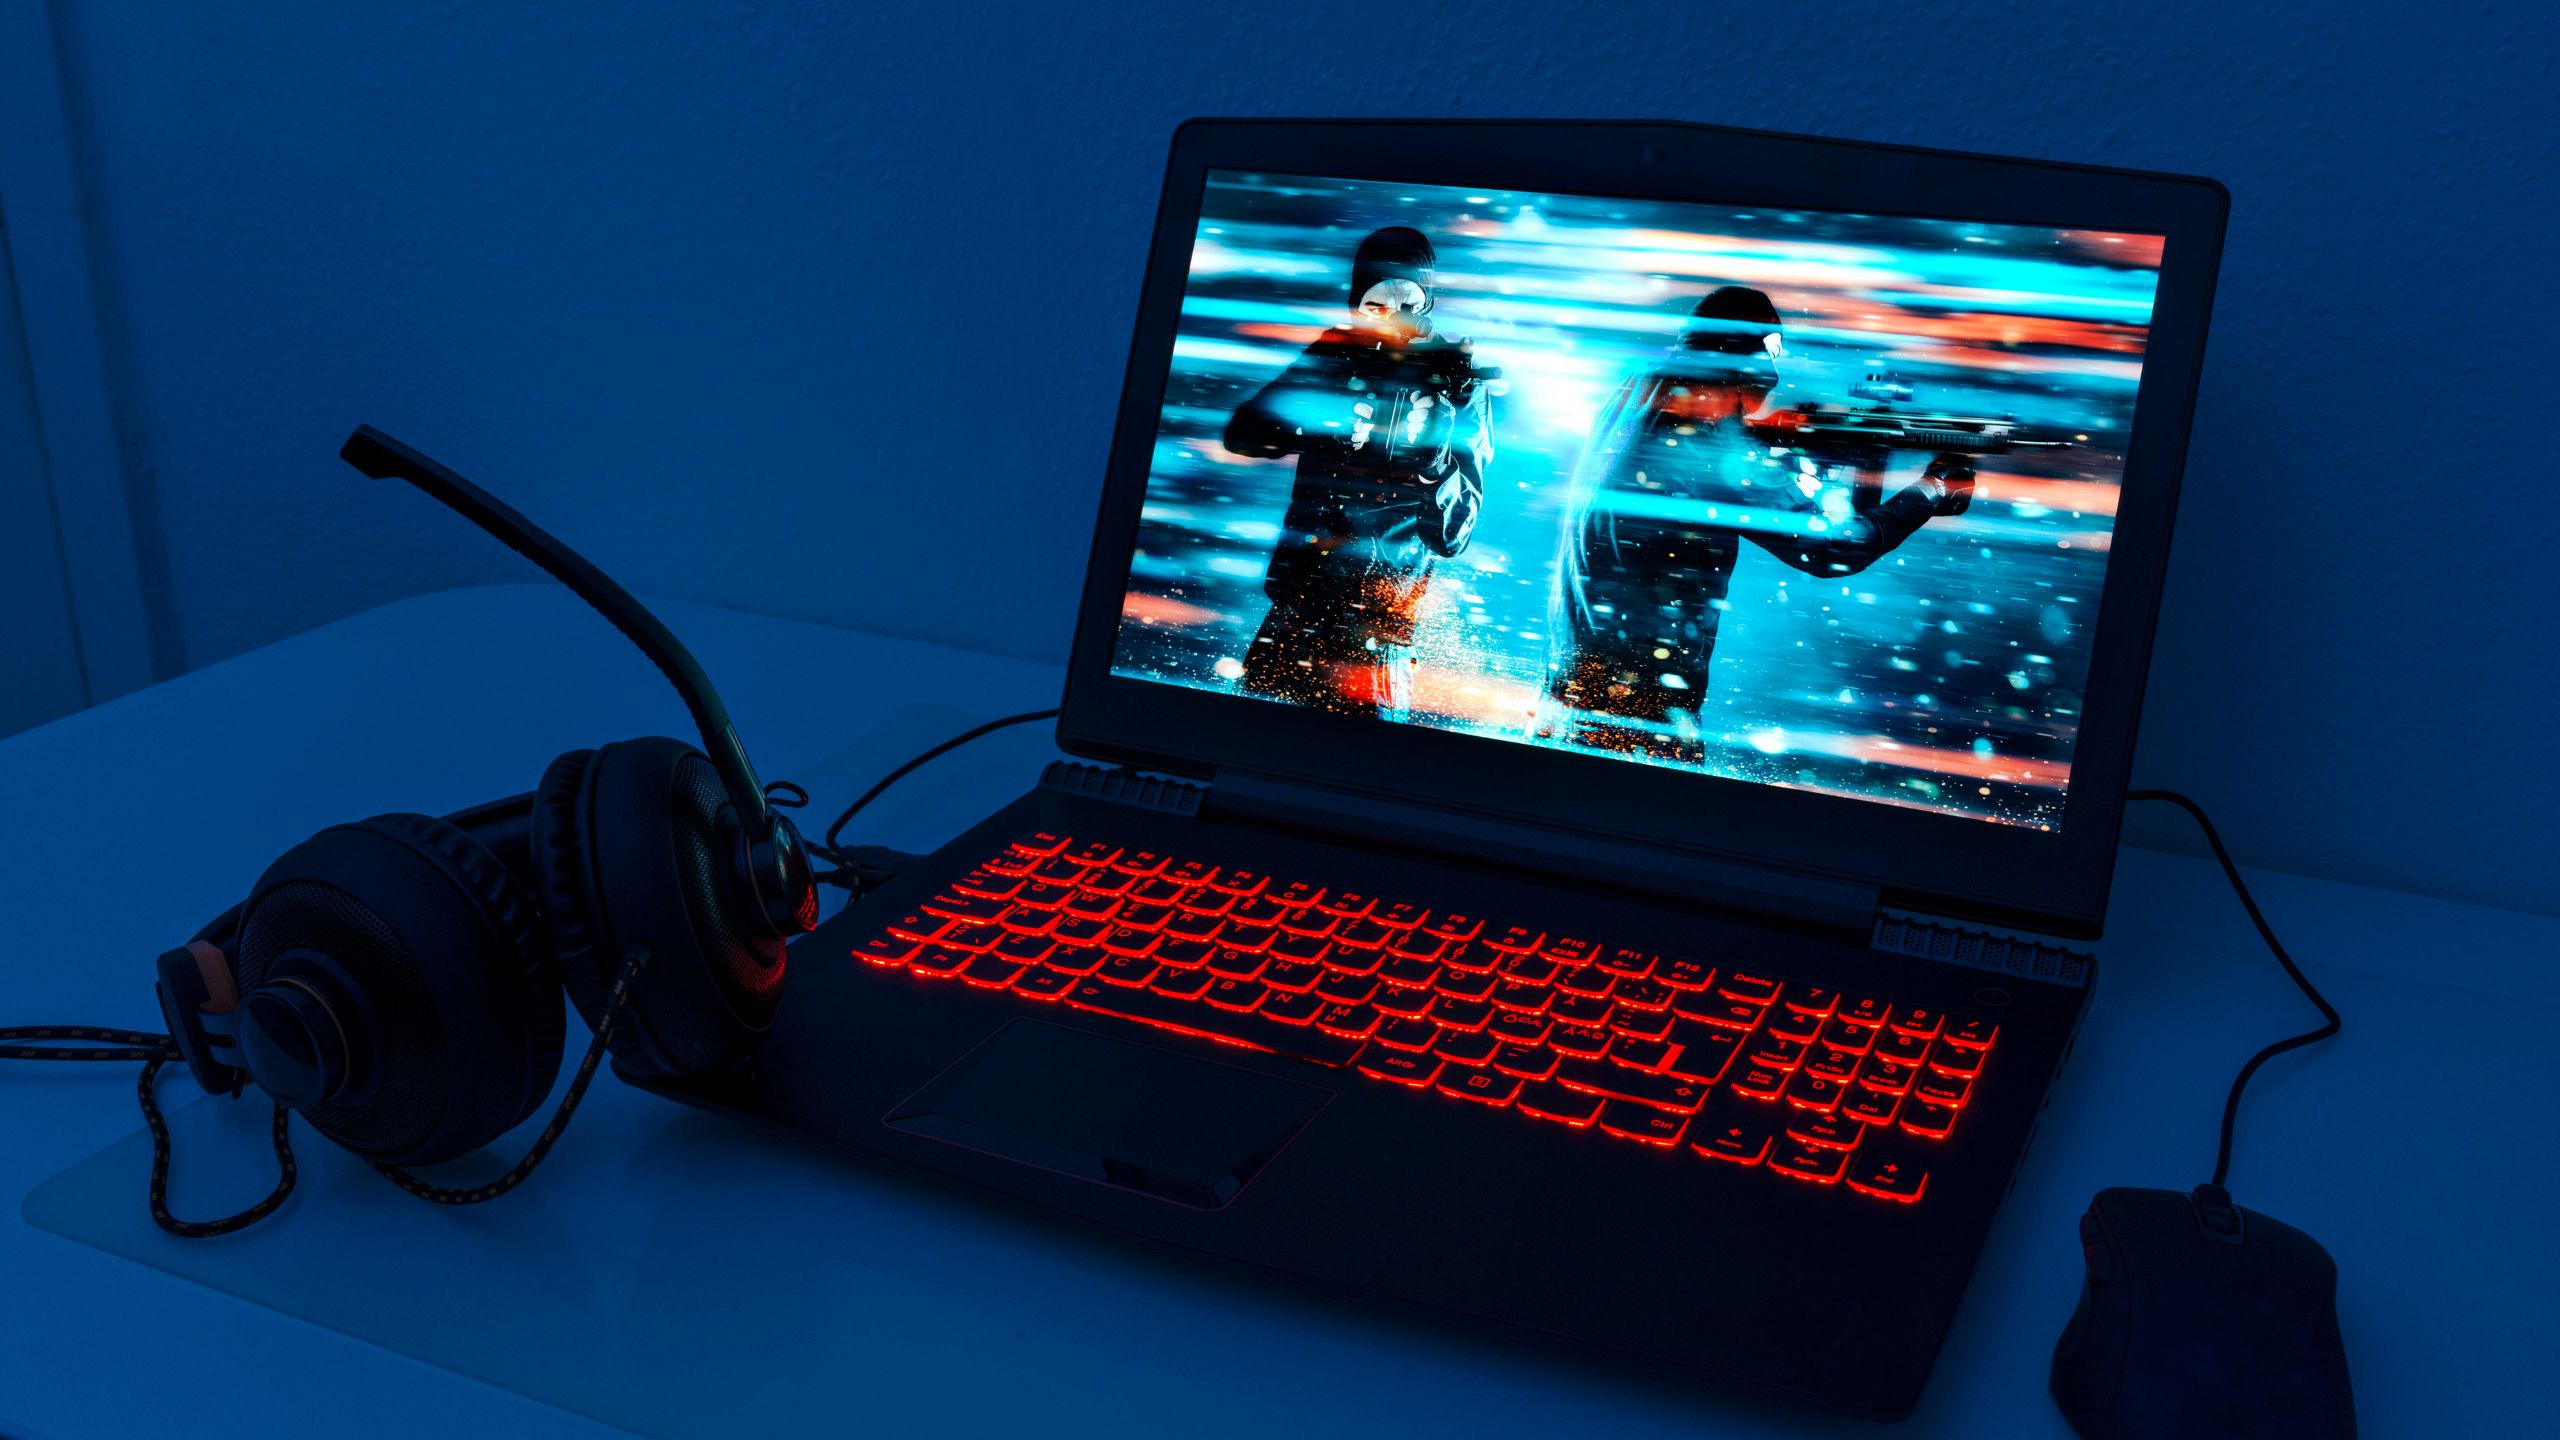 featured image - 5 Best Budget Gaming Laptops Under $500 